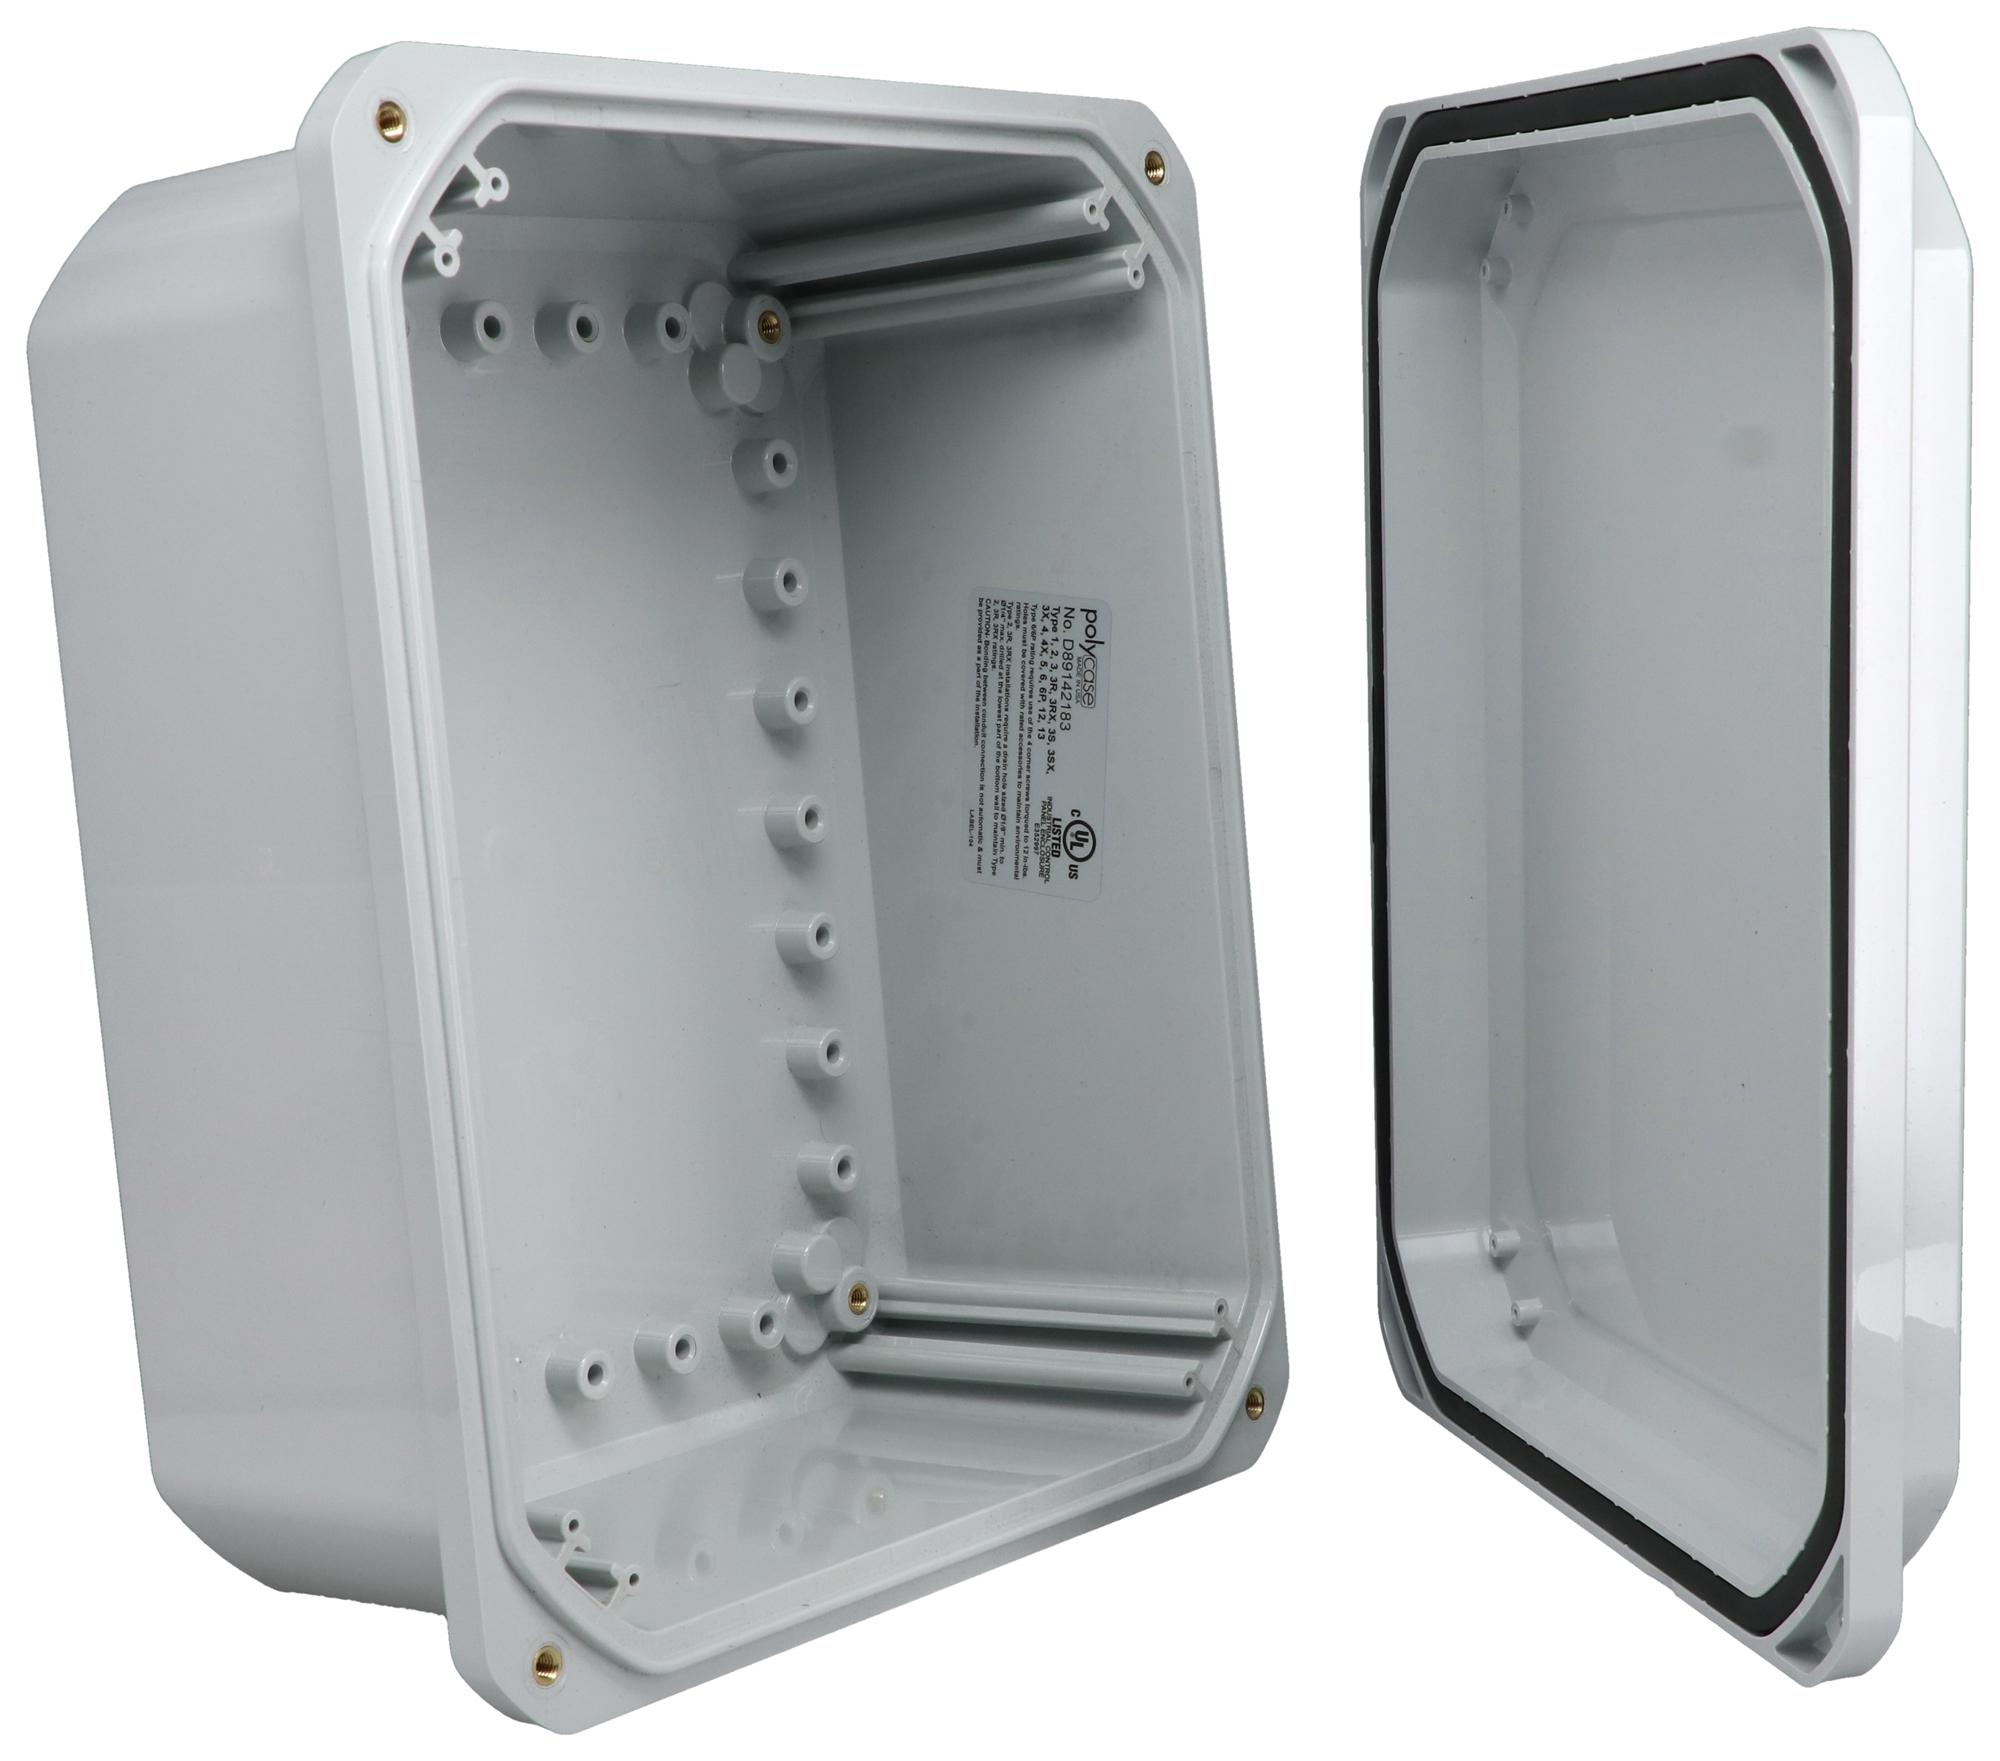 Bud Industries Dps-28710 Enclosure, Outdoor, Pc, Light Grey